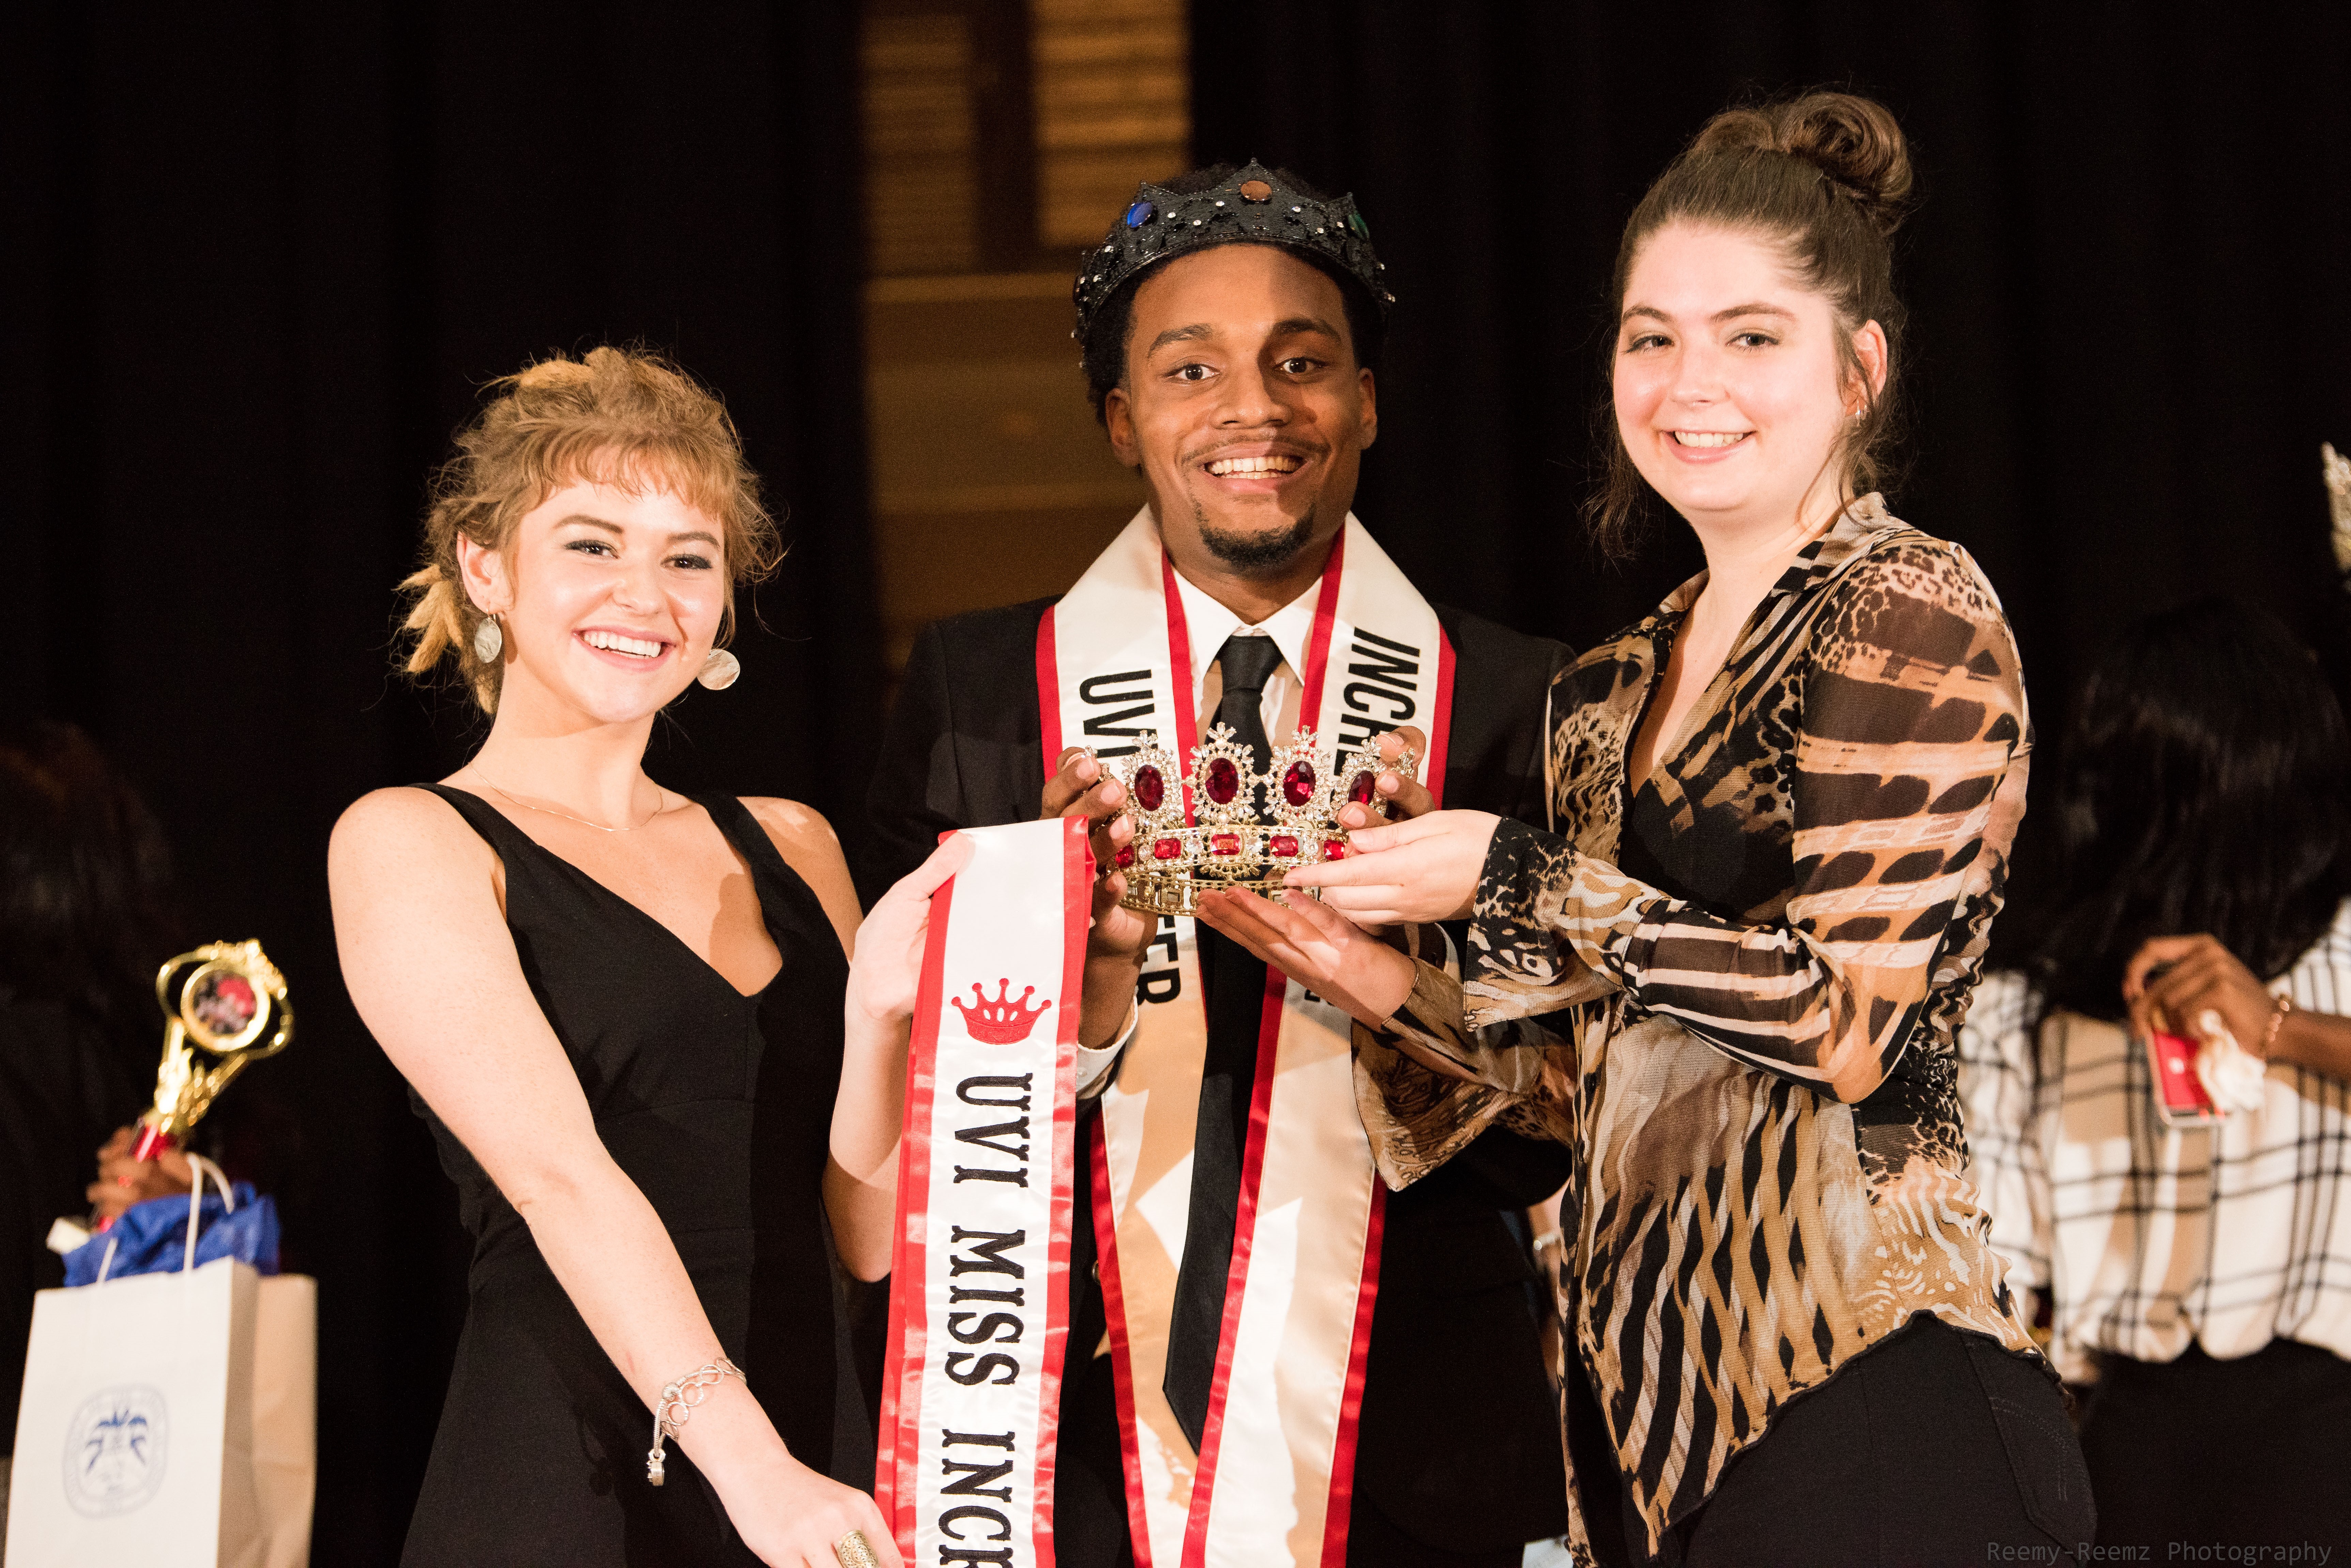 UVI Crowns Two '2018 Miss Incredibles' At Inaugural Event on St. Croix Campus